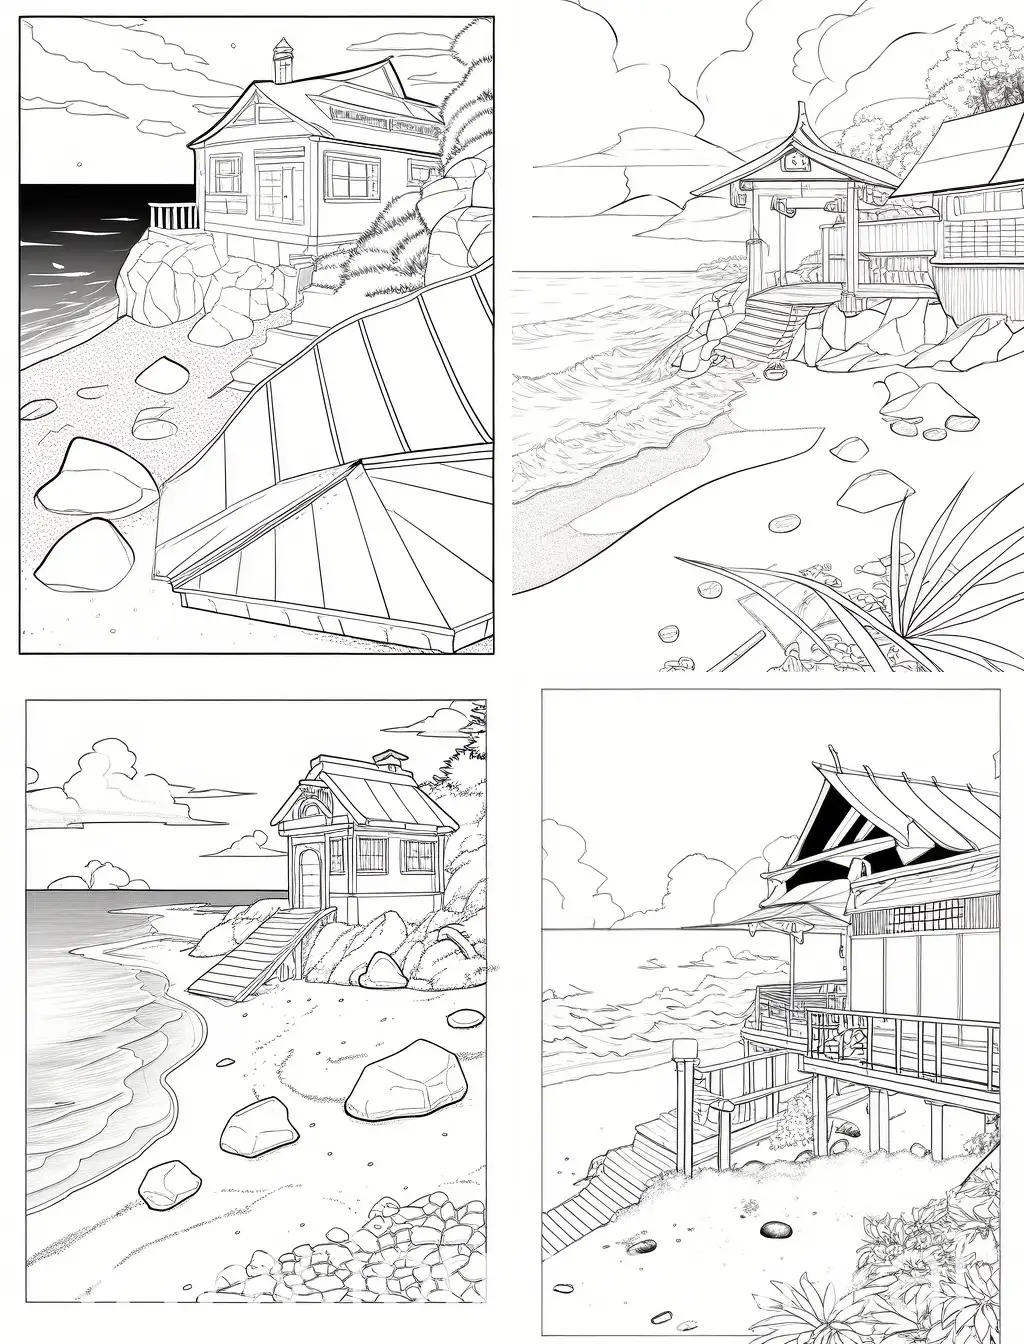 Beach-House-Coloring-Page-Tranquil-Black-and-White-Illustration